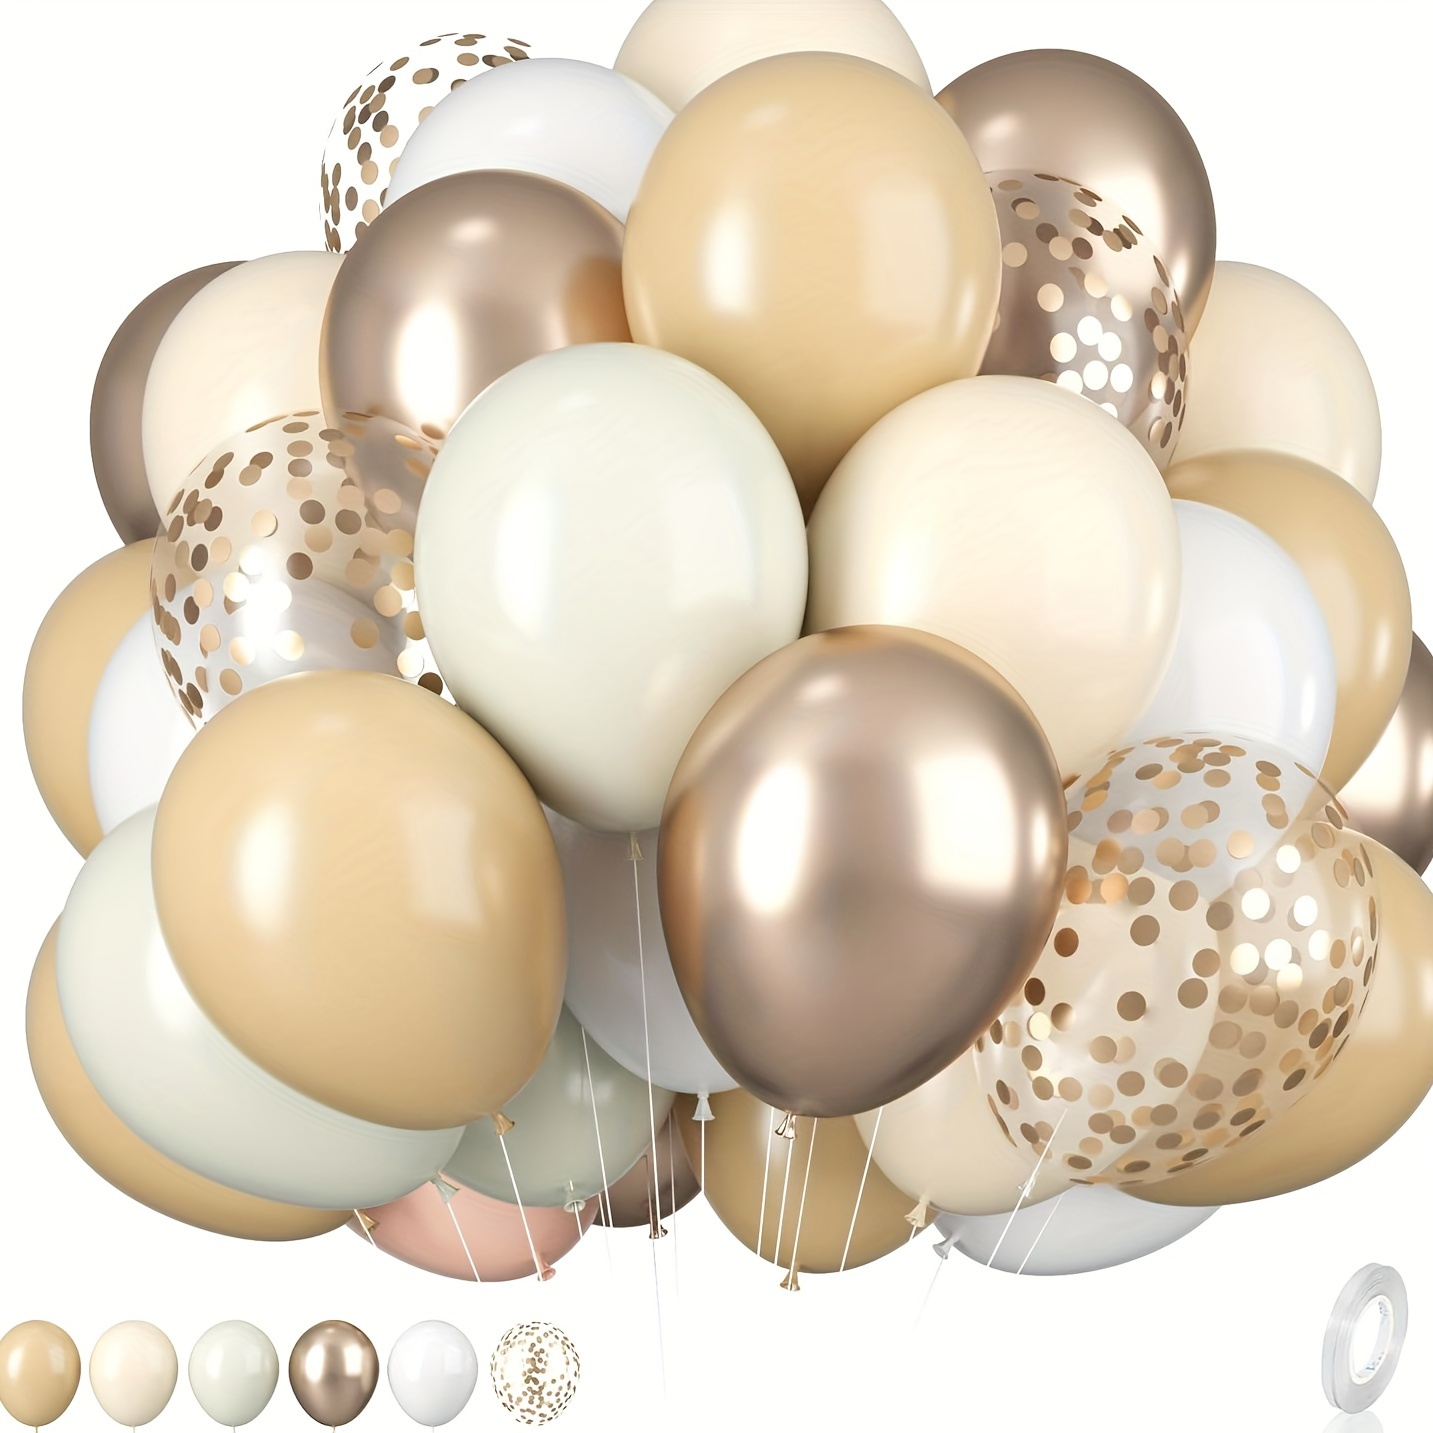 

Cream And Sand Golden Balloons Set, 12 Inch Beige Balloons With Metallic Chrome Champagne Nude Neutral Cream White Balloon For Bridal Birthday Wedding Party Decorations